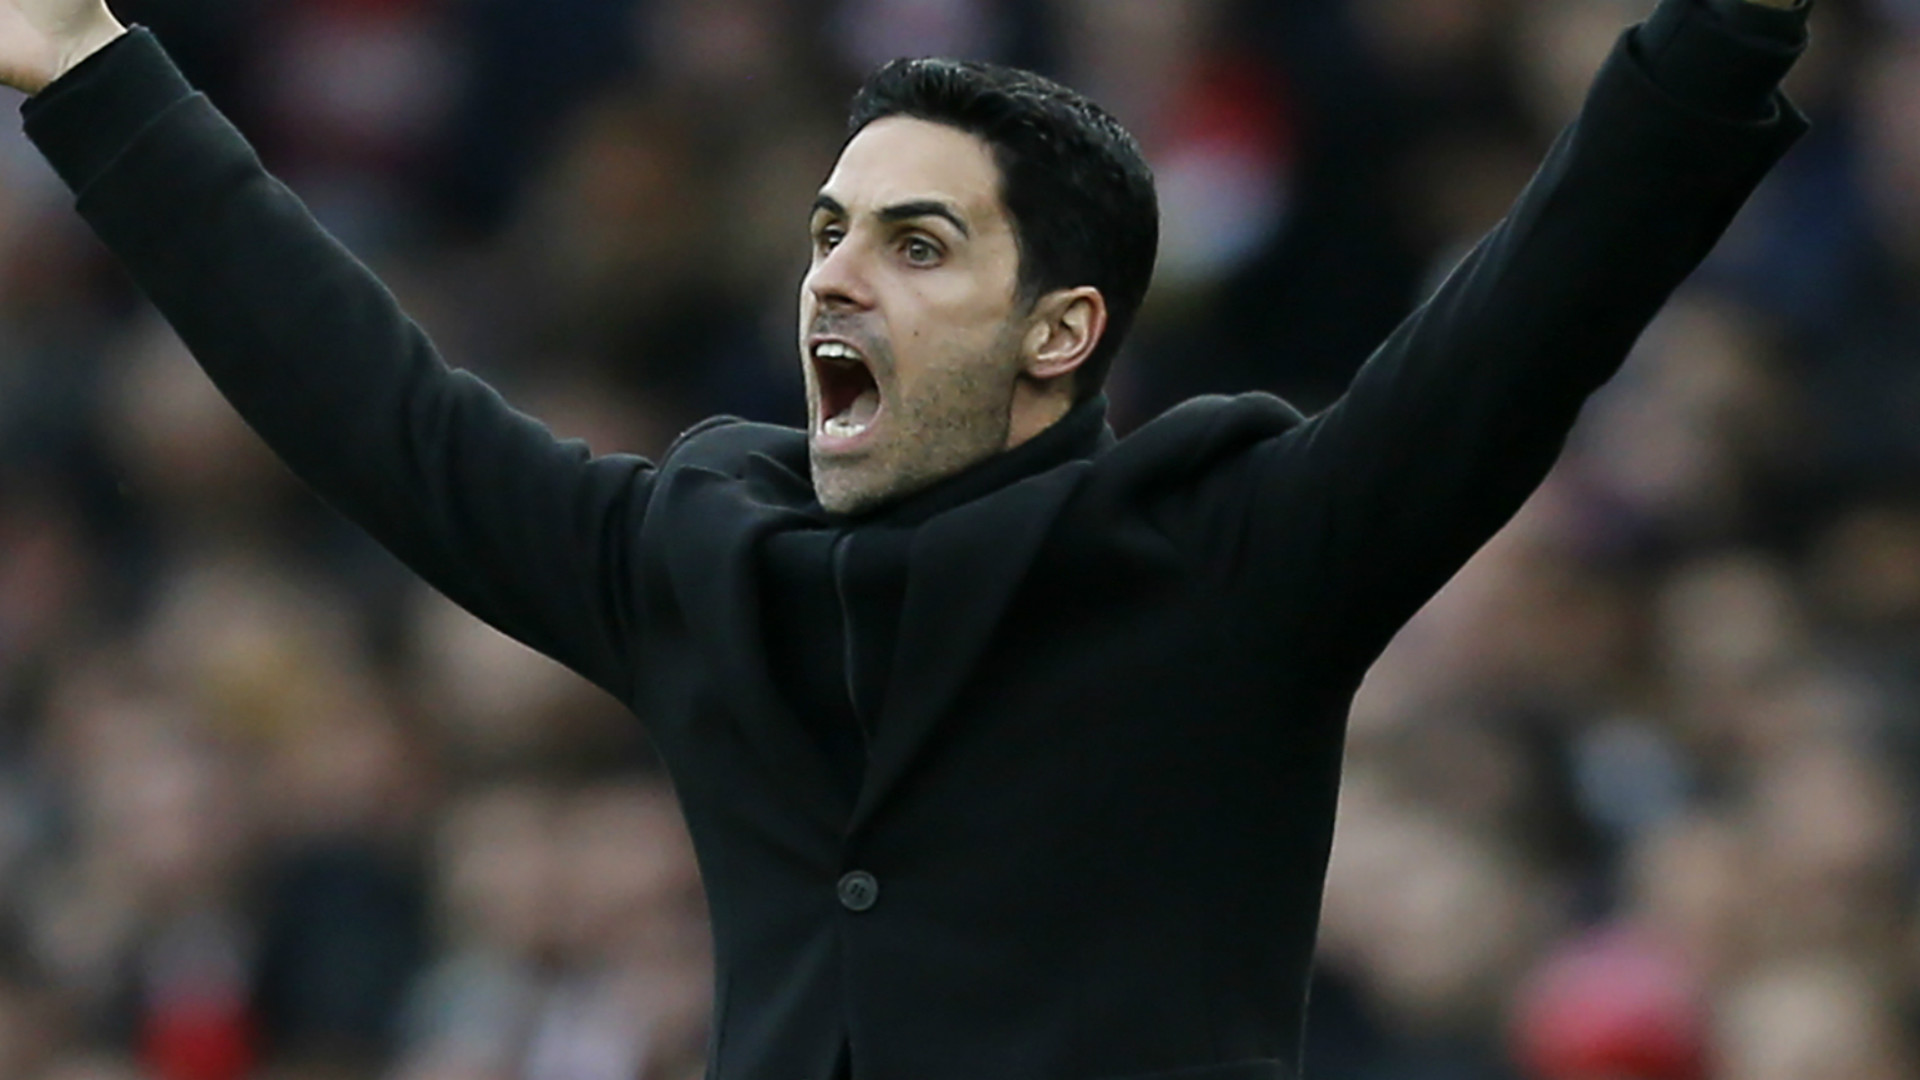 'Arteta needs £150m to spend on a new squad' - Arsenal played 'survival football' against Liverpool, says Groves